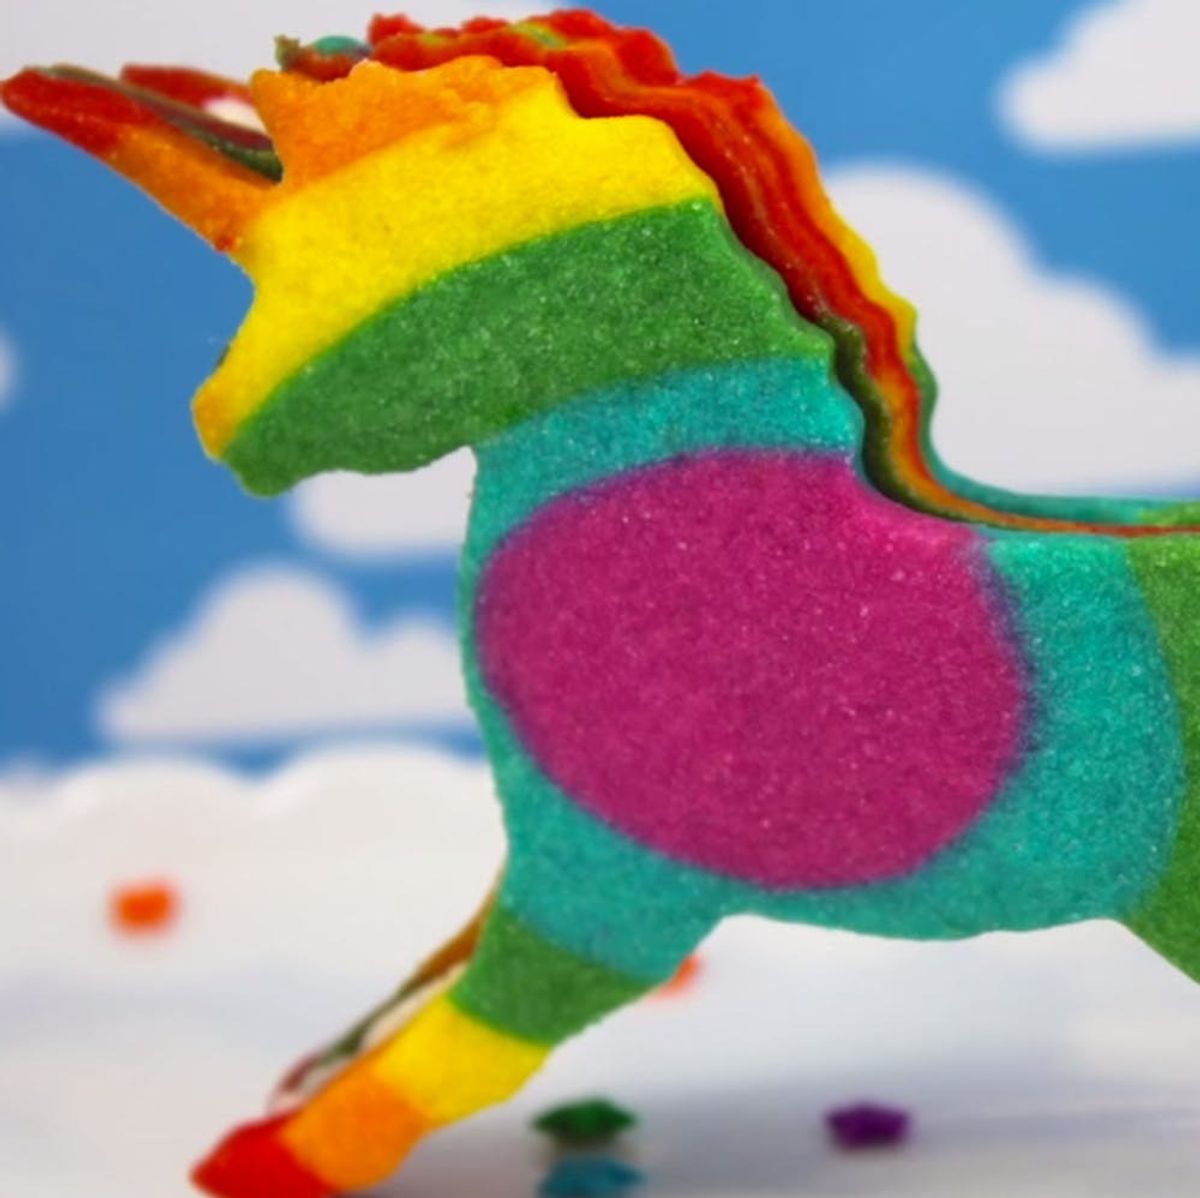 10 of the Craziest Baking Tutorials from This Sweet YouTube Star